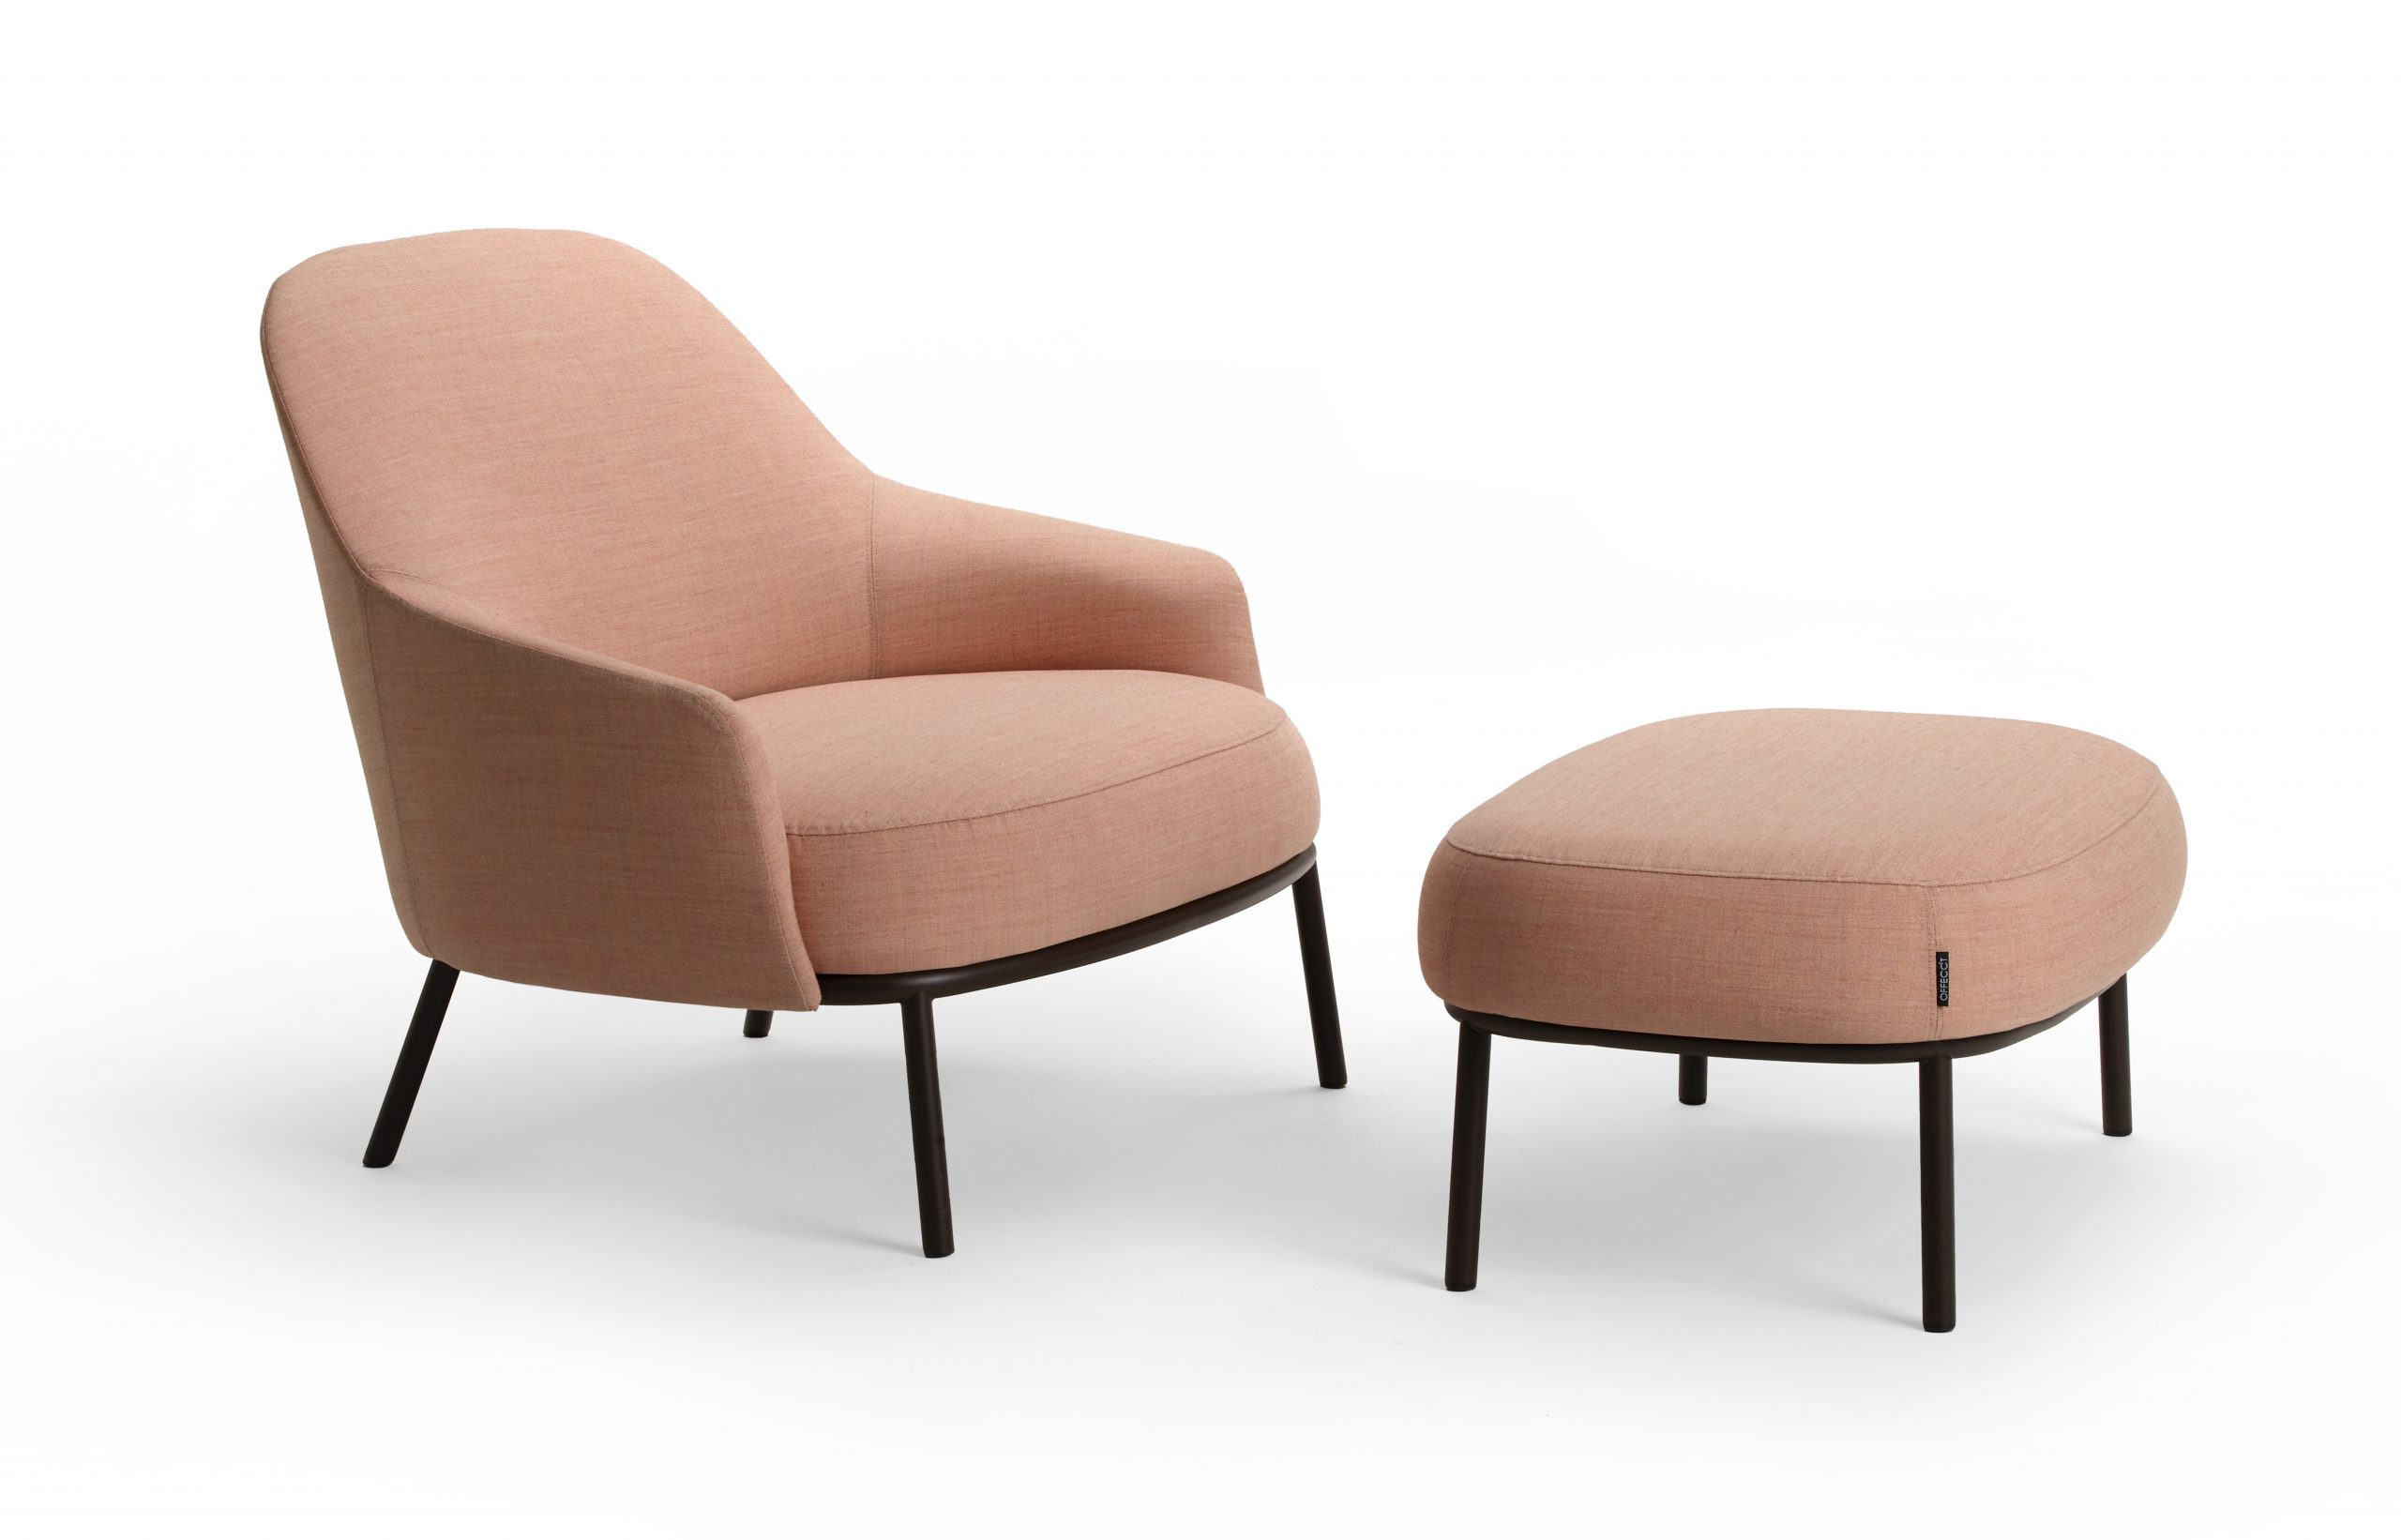 Shift easychair classic and ottoman by Debiasi Sandri for Offecct